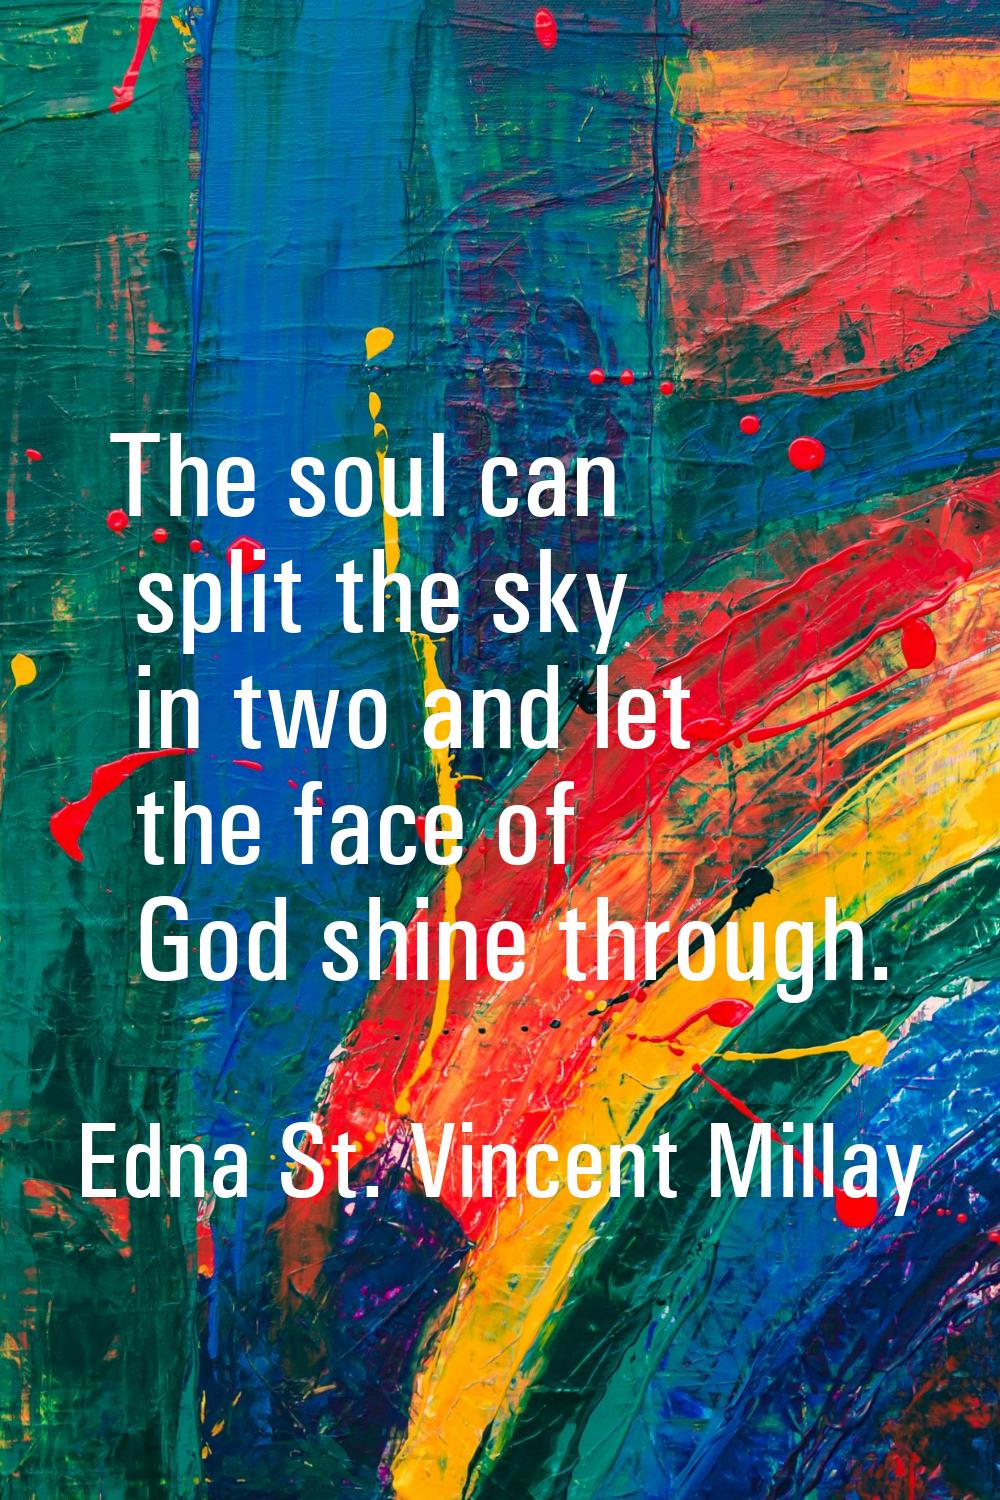 The soul can split the sky in two and let the face of God shine through.